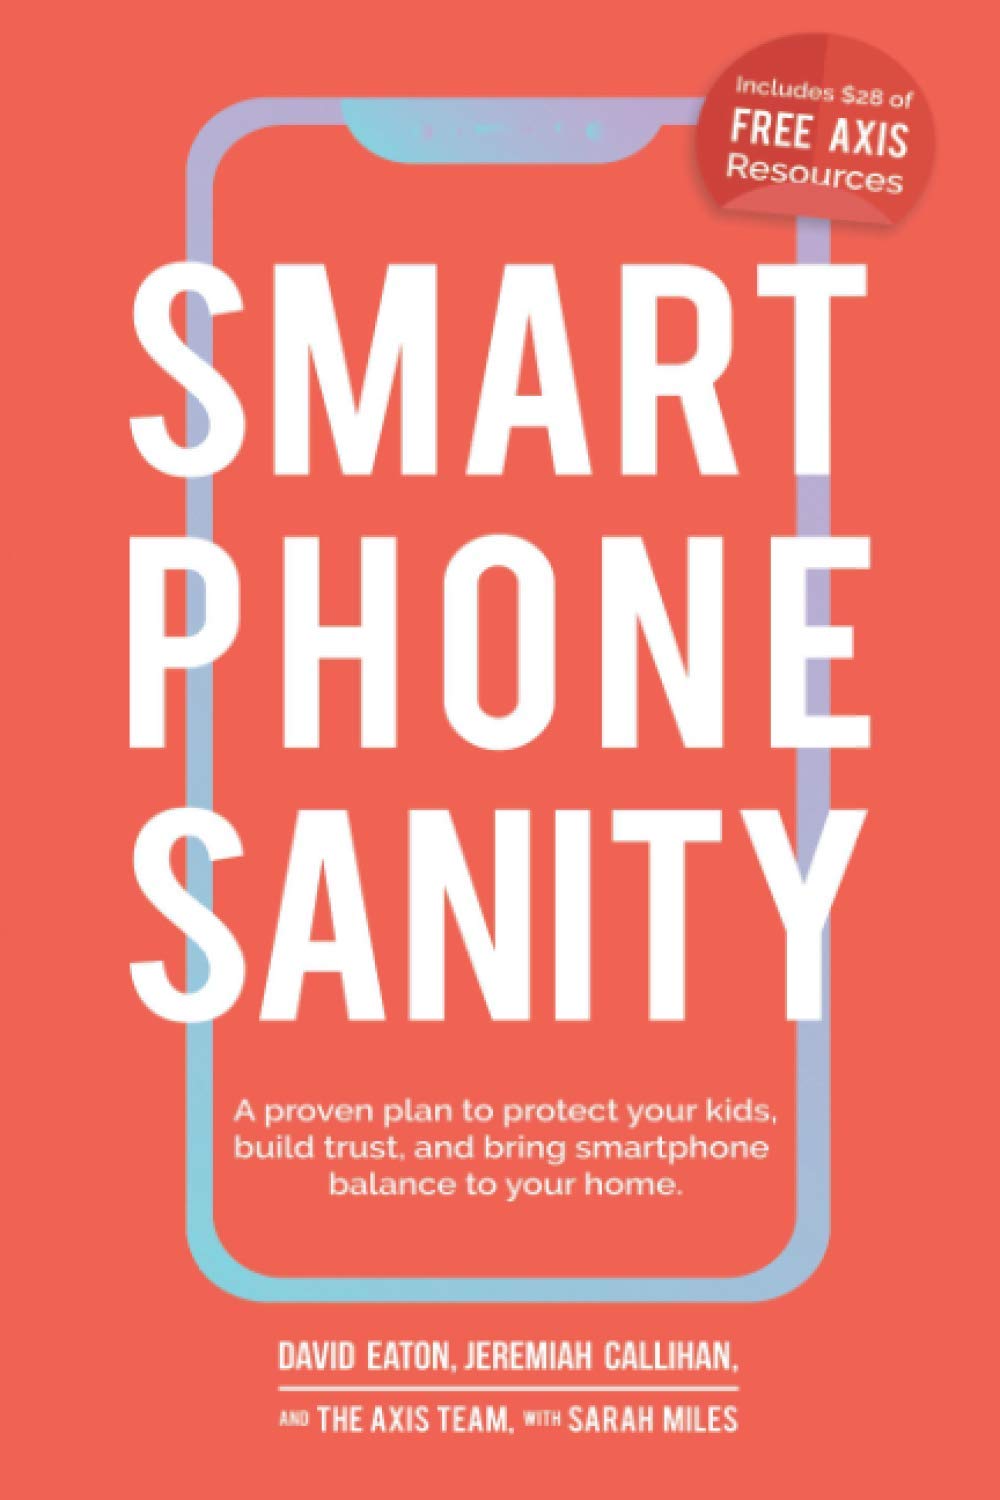 Smartphone Sanity: A proven plan to protect your kids, build trust, and bring smartphone balance to your home.